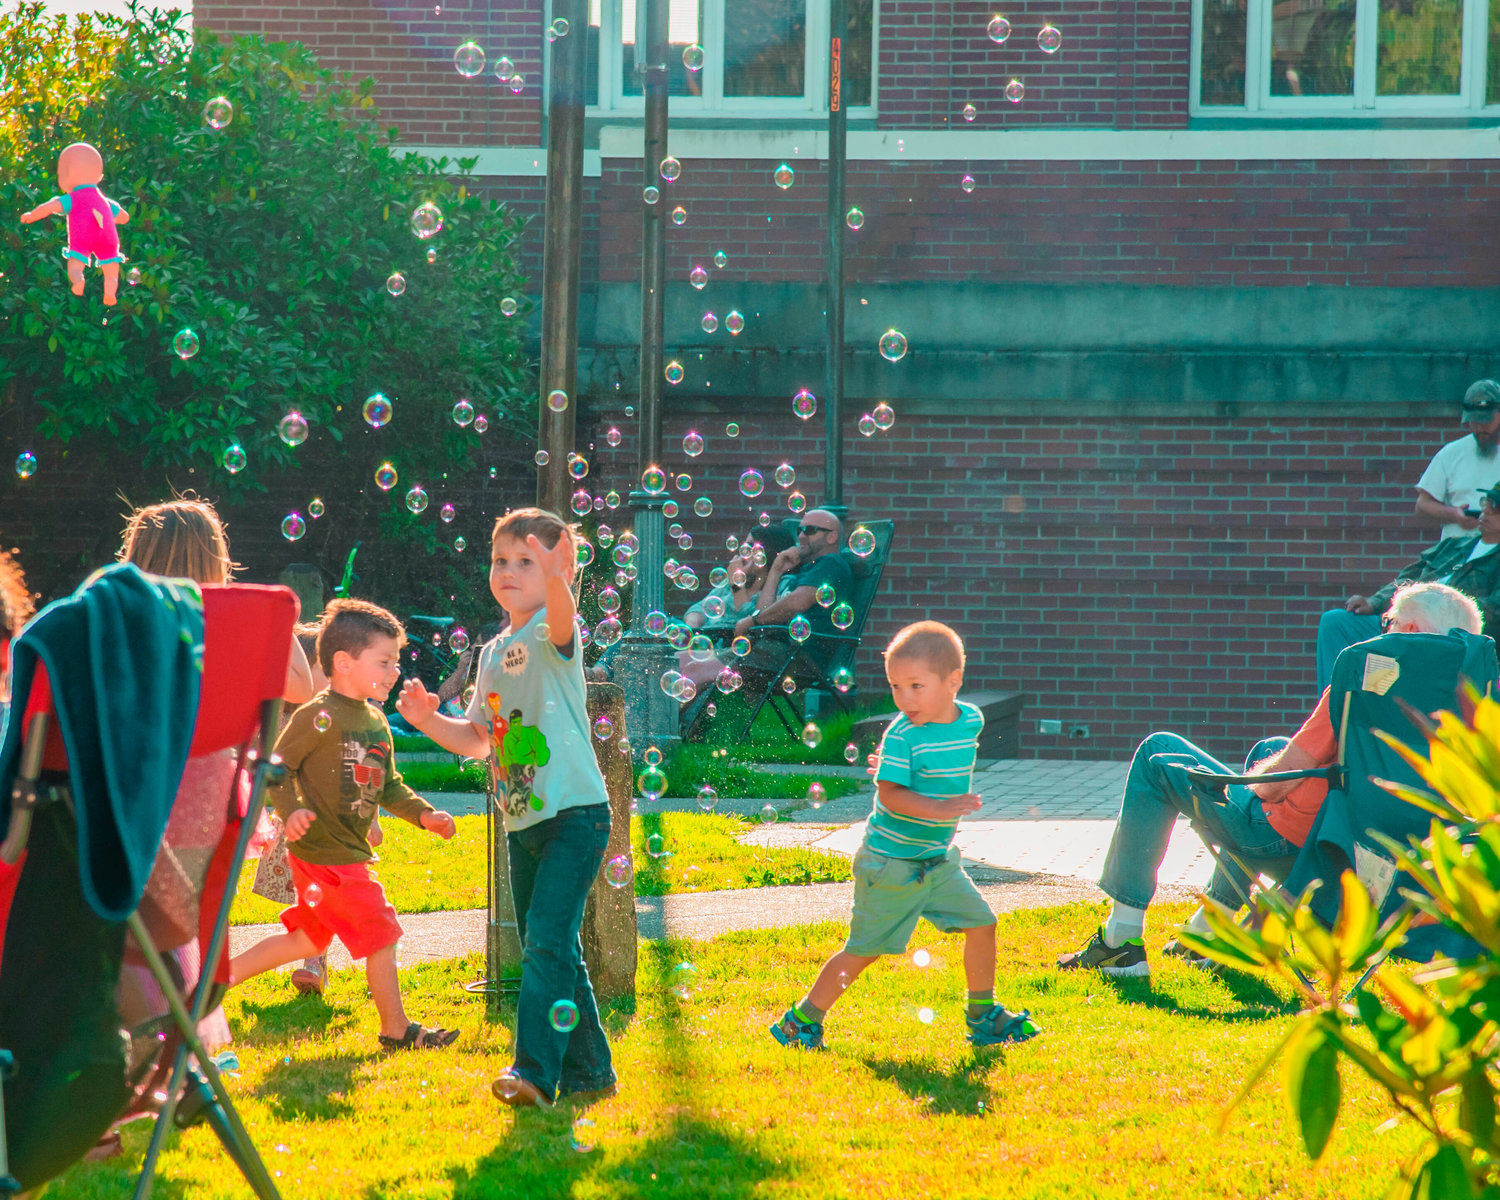 Kids play in bubbles in George Washington Park Saturday in Centralia as music plays from the park gazebo.